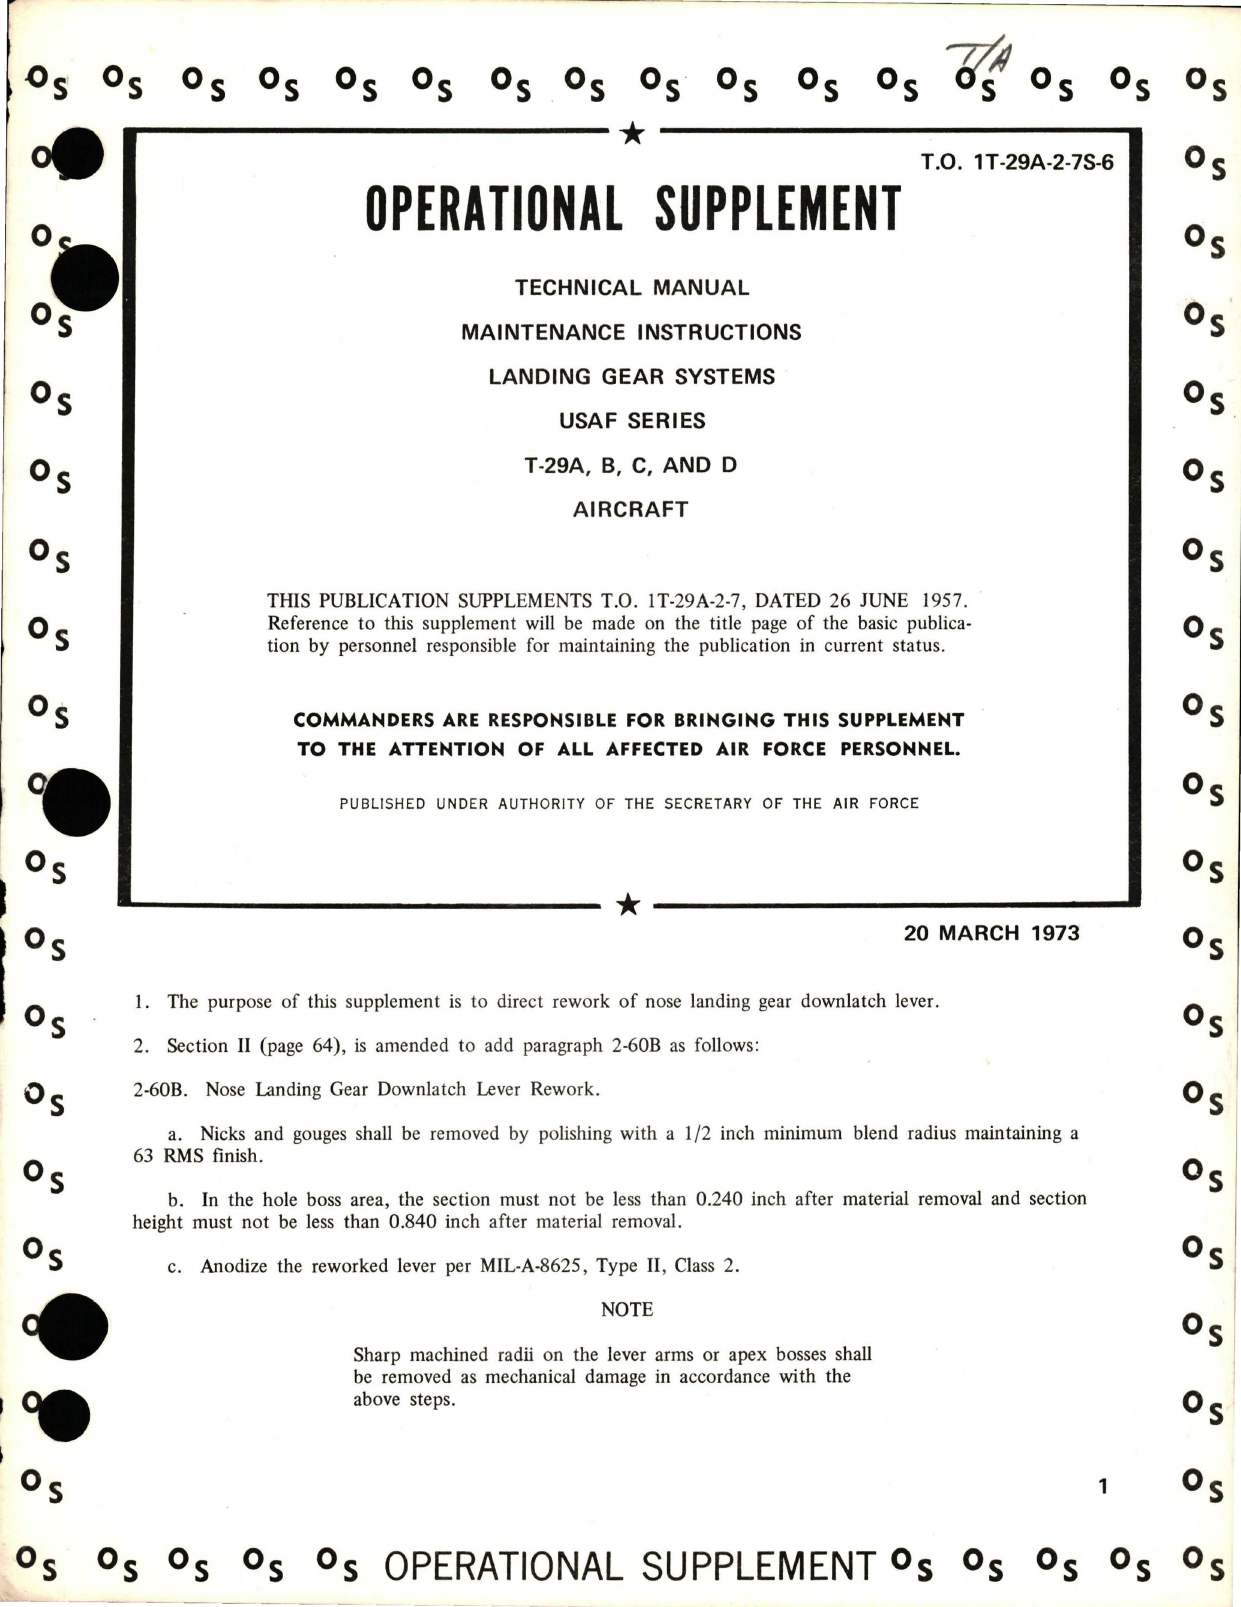 Sample page 1 from AirCorps Library document: Operational Supplement for Maintenance Instructions for Landing Gear Systems - T-29A, T-29B, T-29C and T-29D